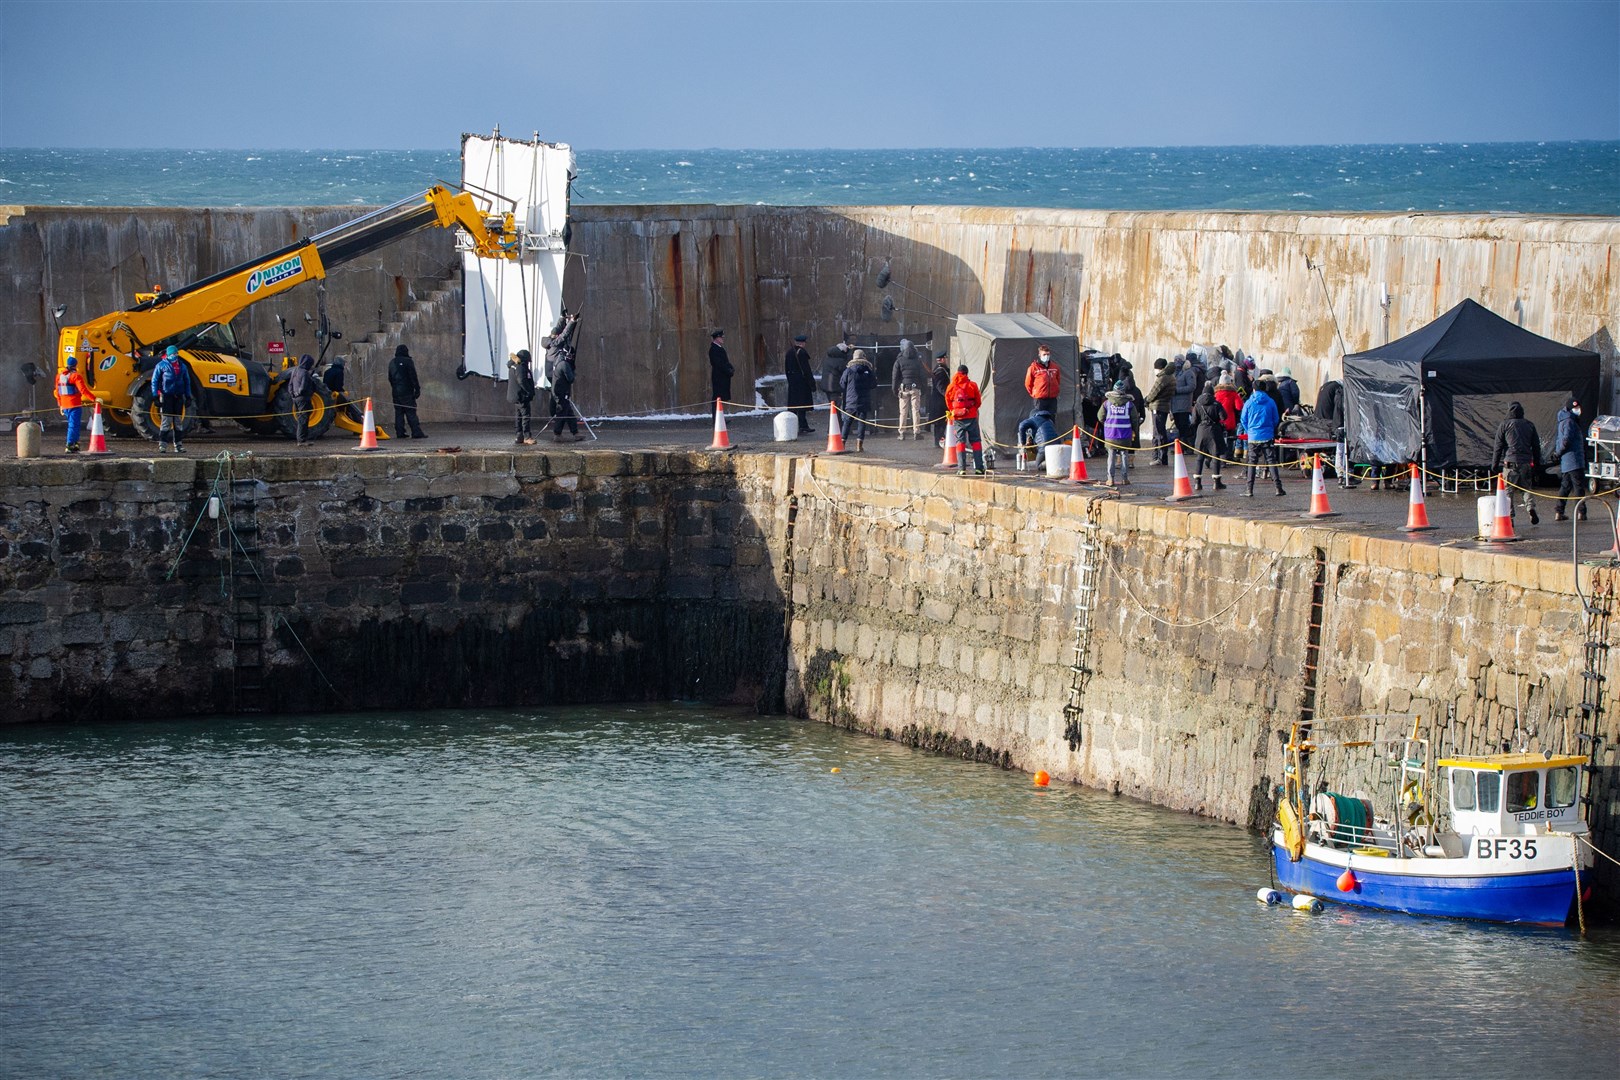 Monday afternoon filming last February took place on the harbour pier. Picture: Daniel Forsyth